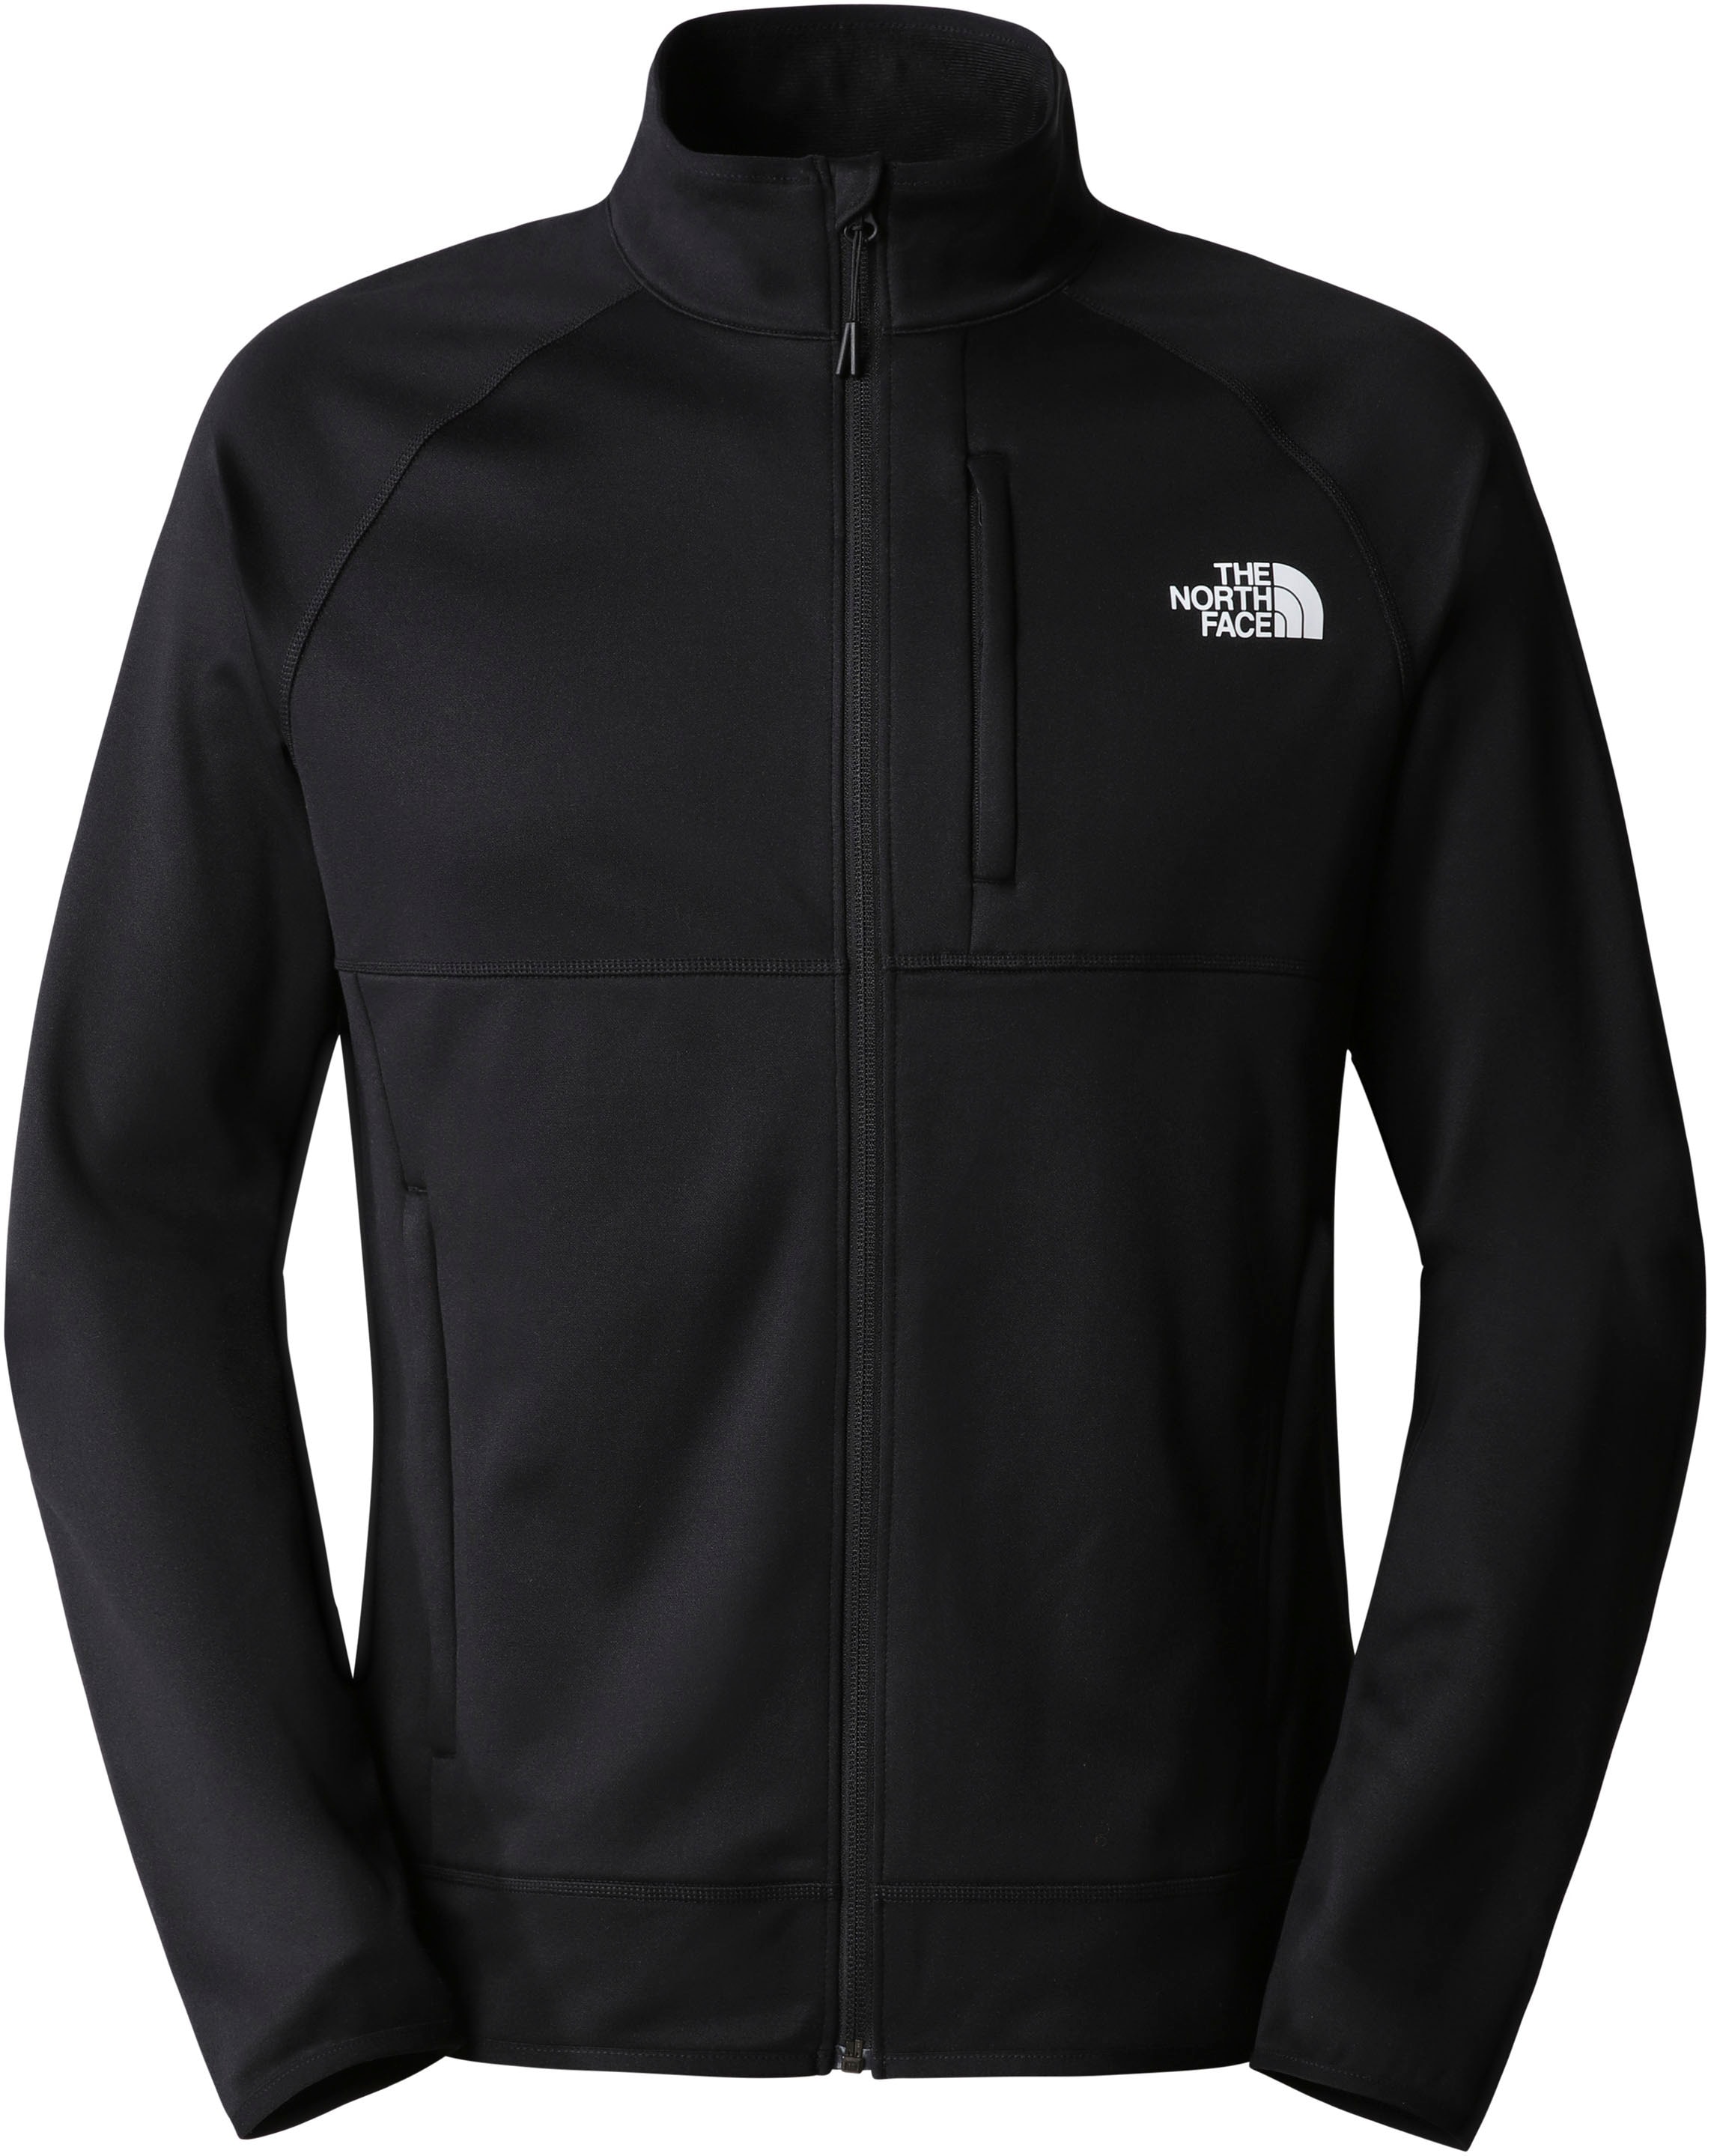 The North Face Funktionsjacke »M CANYONLANDS FULL ZIP«, (1 St.)